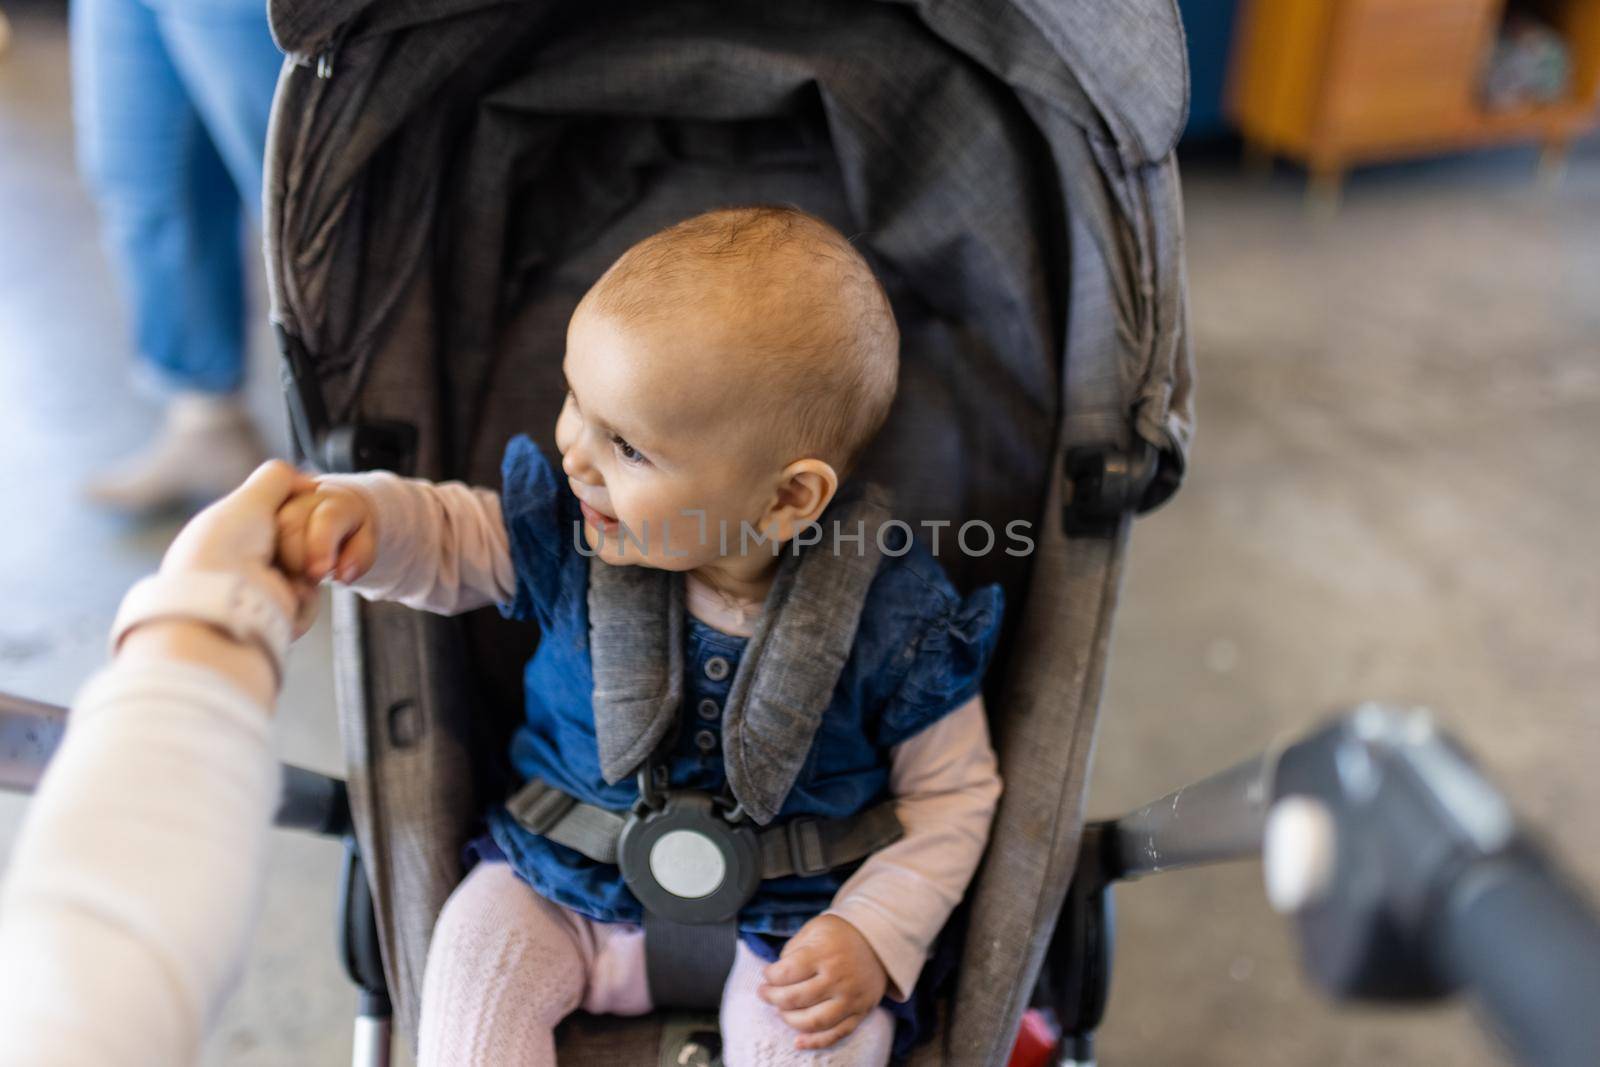 Adorable view of happy baby holding the hand of her sister in gray stroller with blurry background. Portrait of cute infant in blue dress resting inside a restaurant. Peaceful toddlers indoors